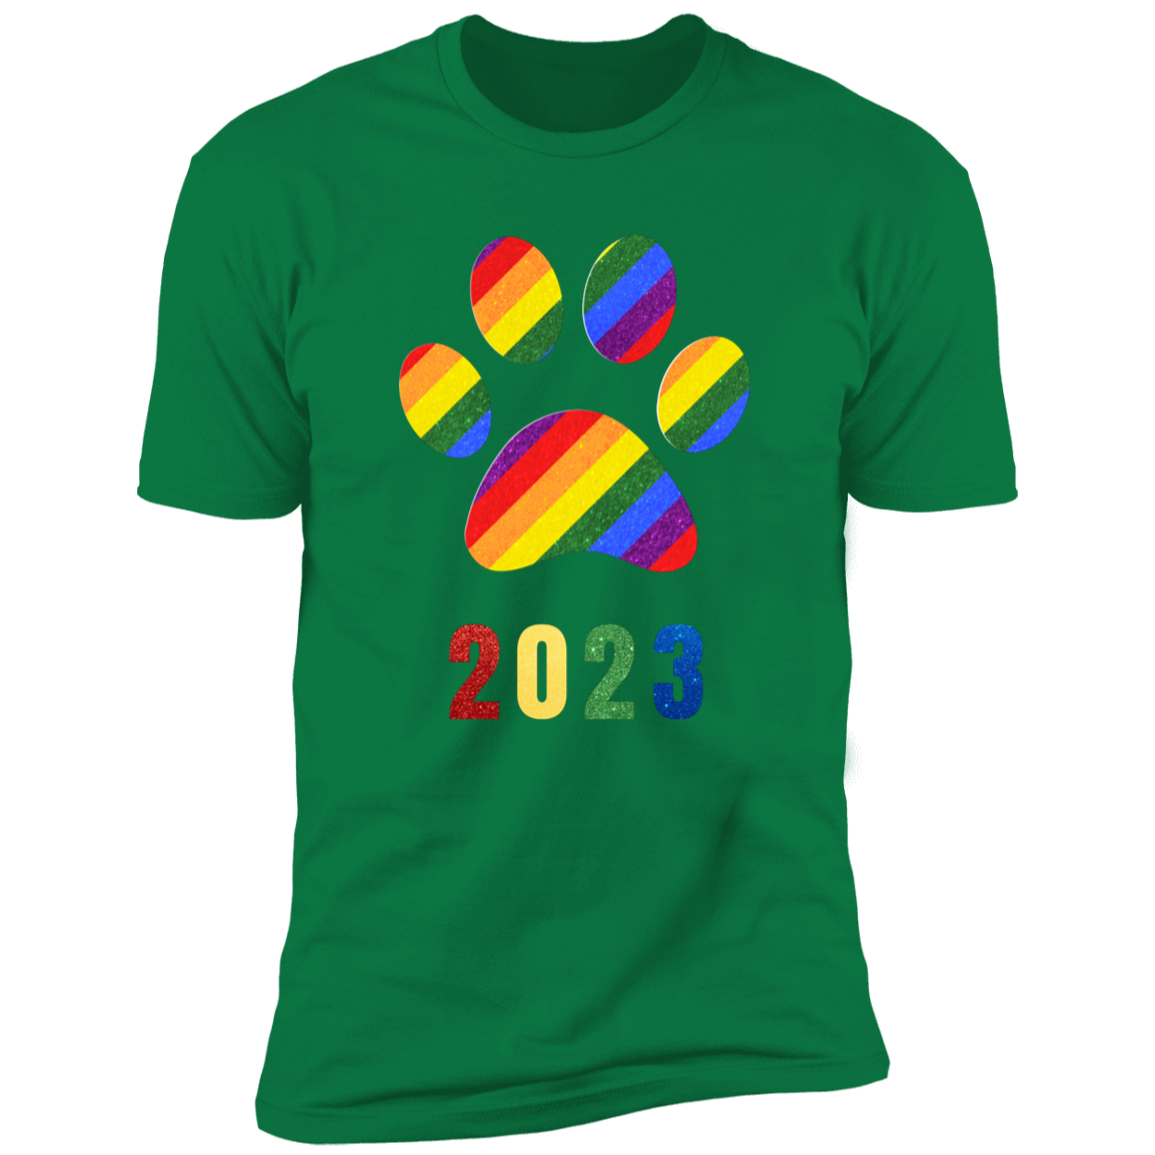 Pride Paw 2023 (Sparkles) Pride T-shirt, Paw Pride Dog Shirt for humans, in kelly green